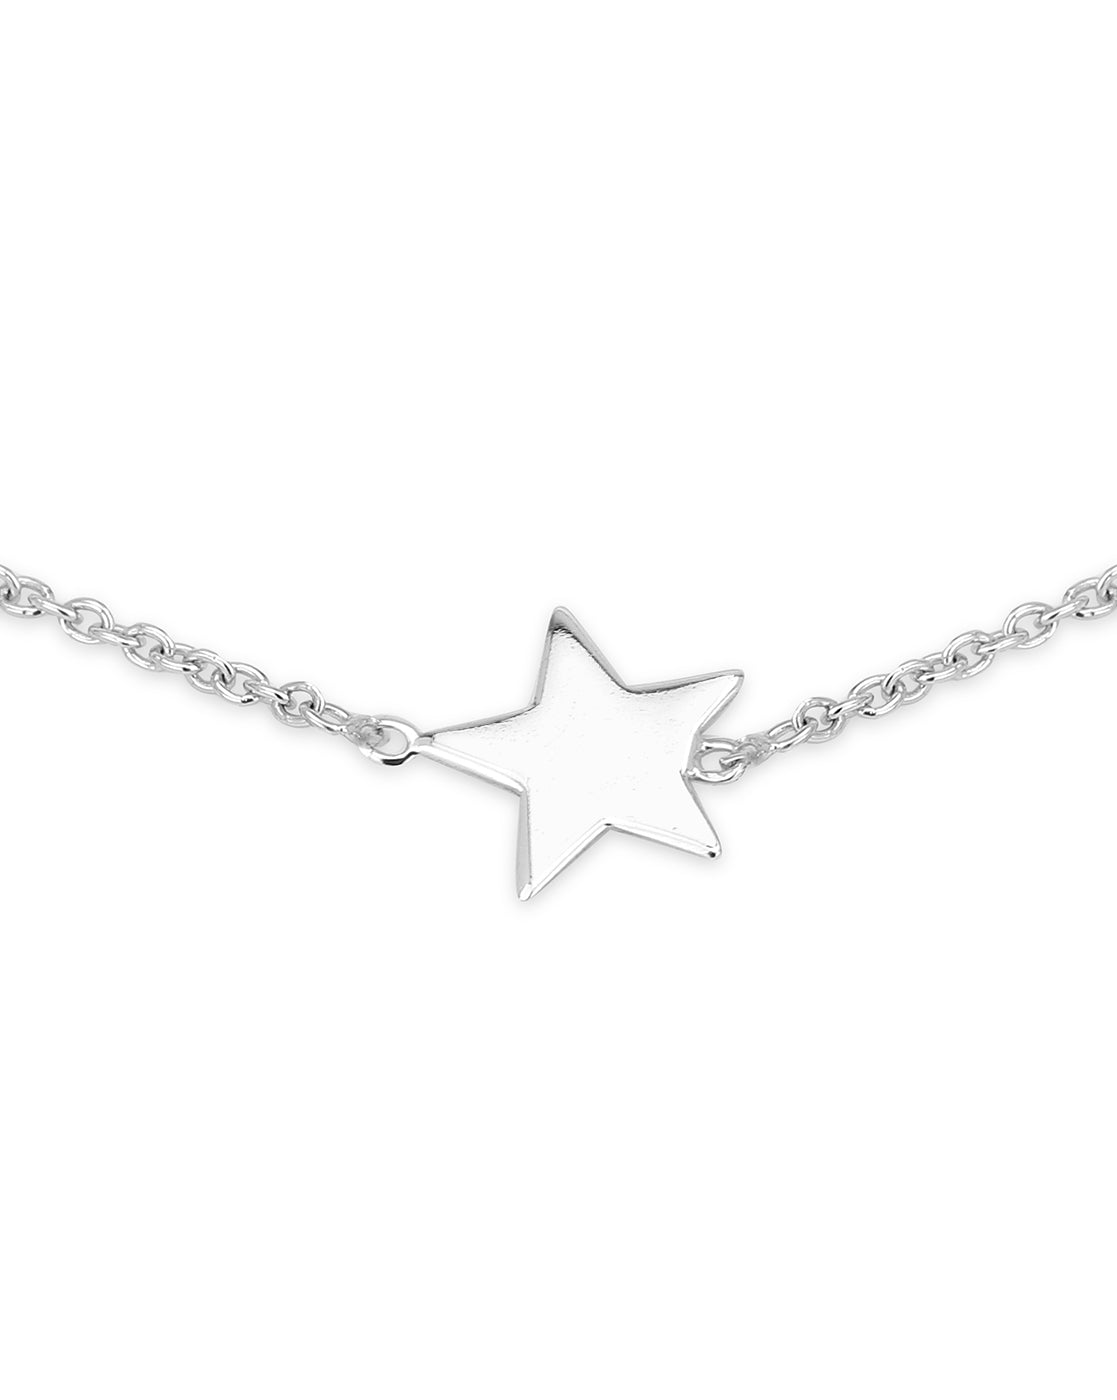 Carlton London 925 Sterling Silver Rhodium Plated With  Star Charm Bracelet